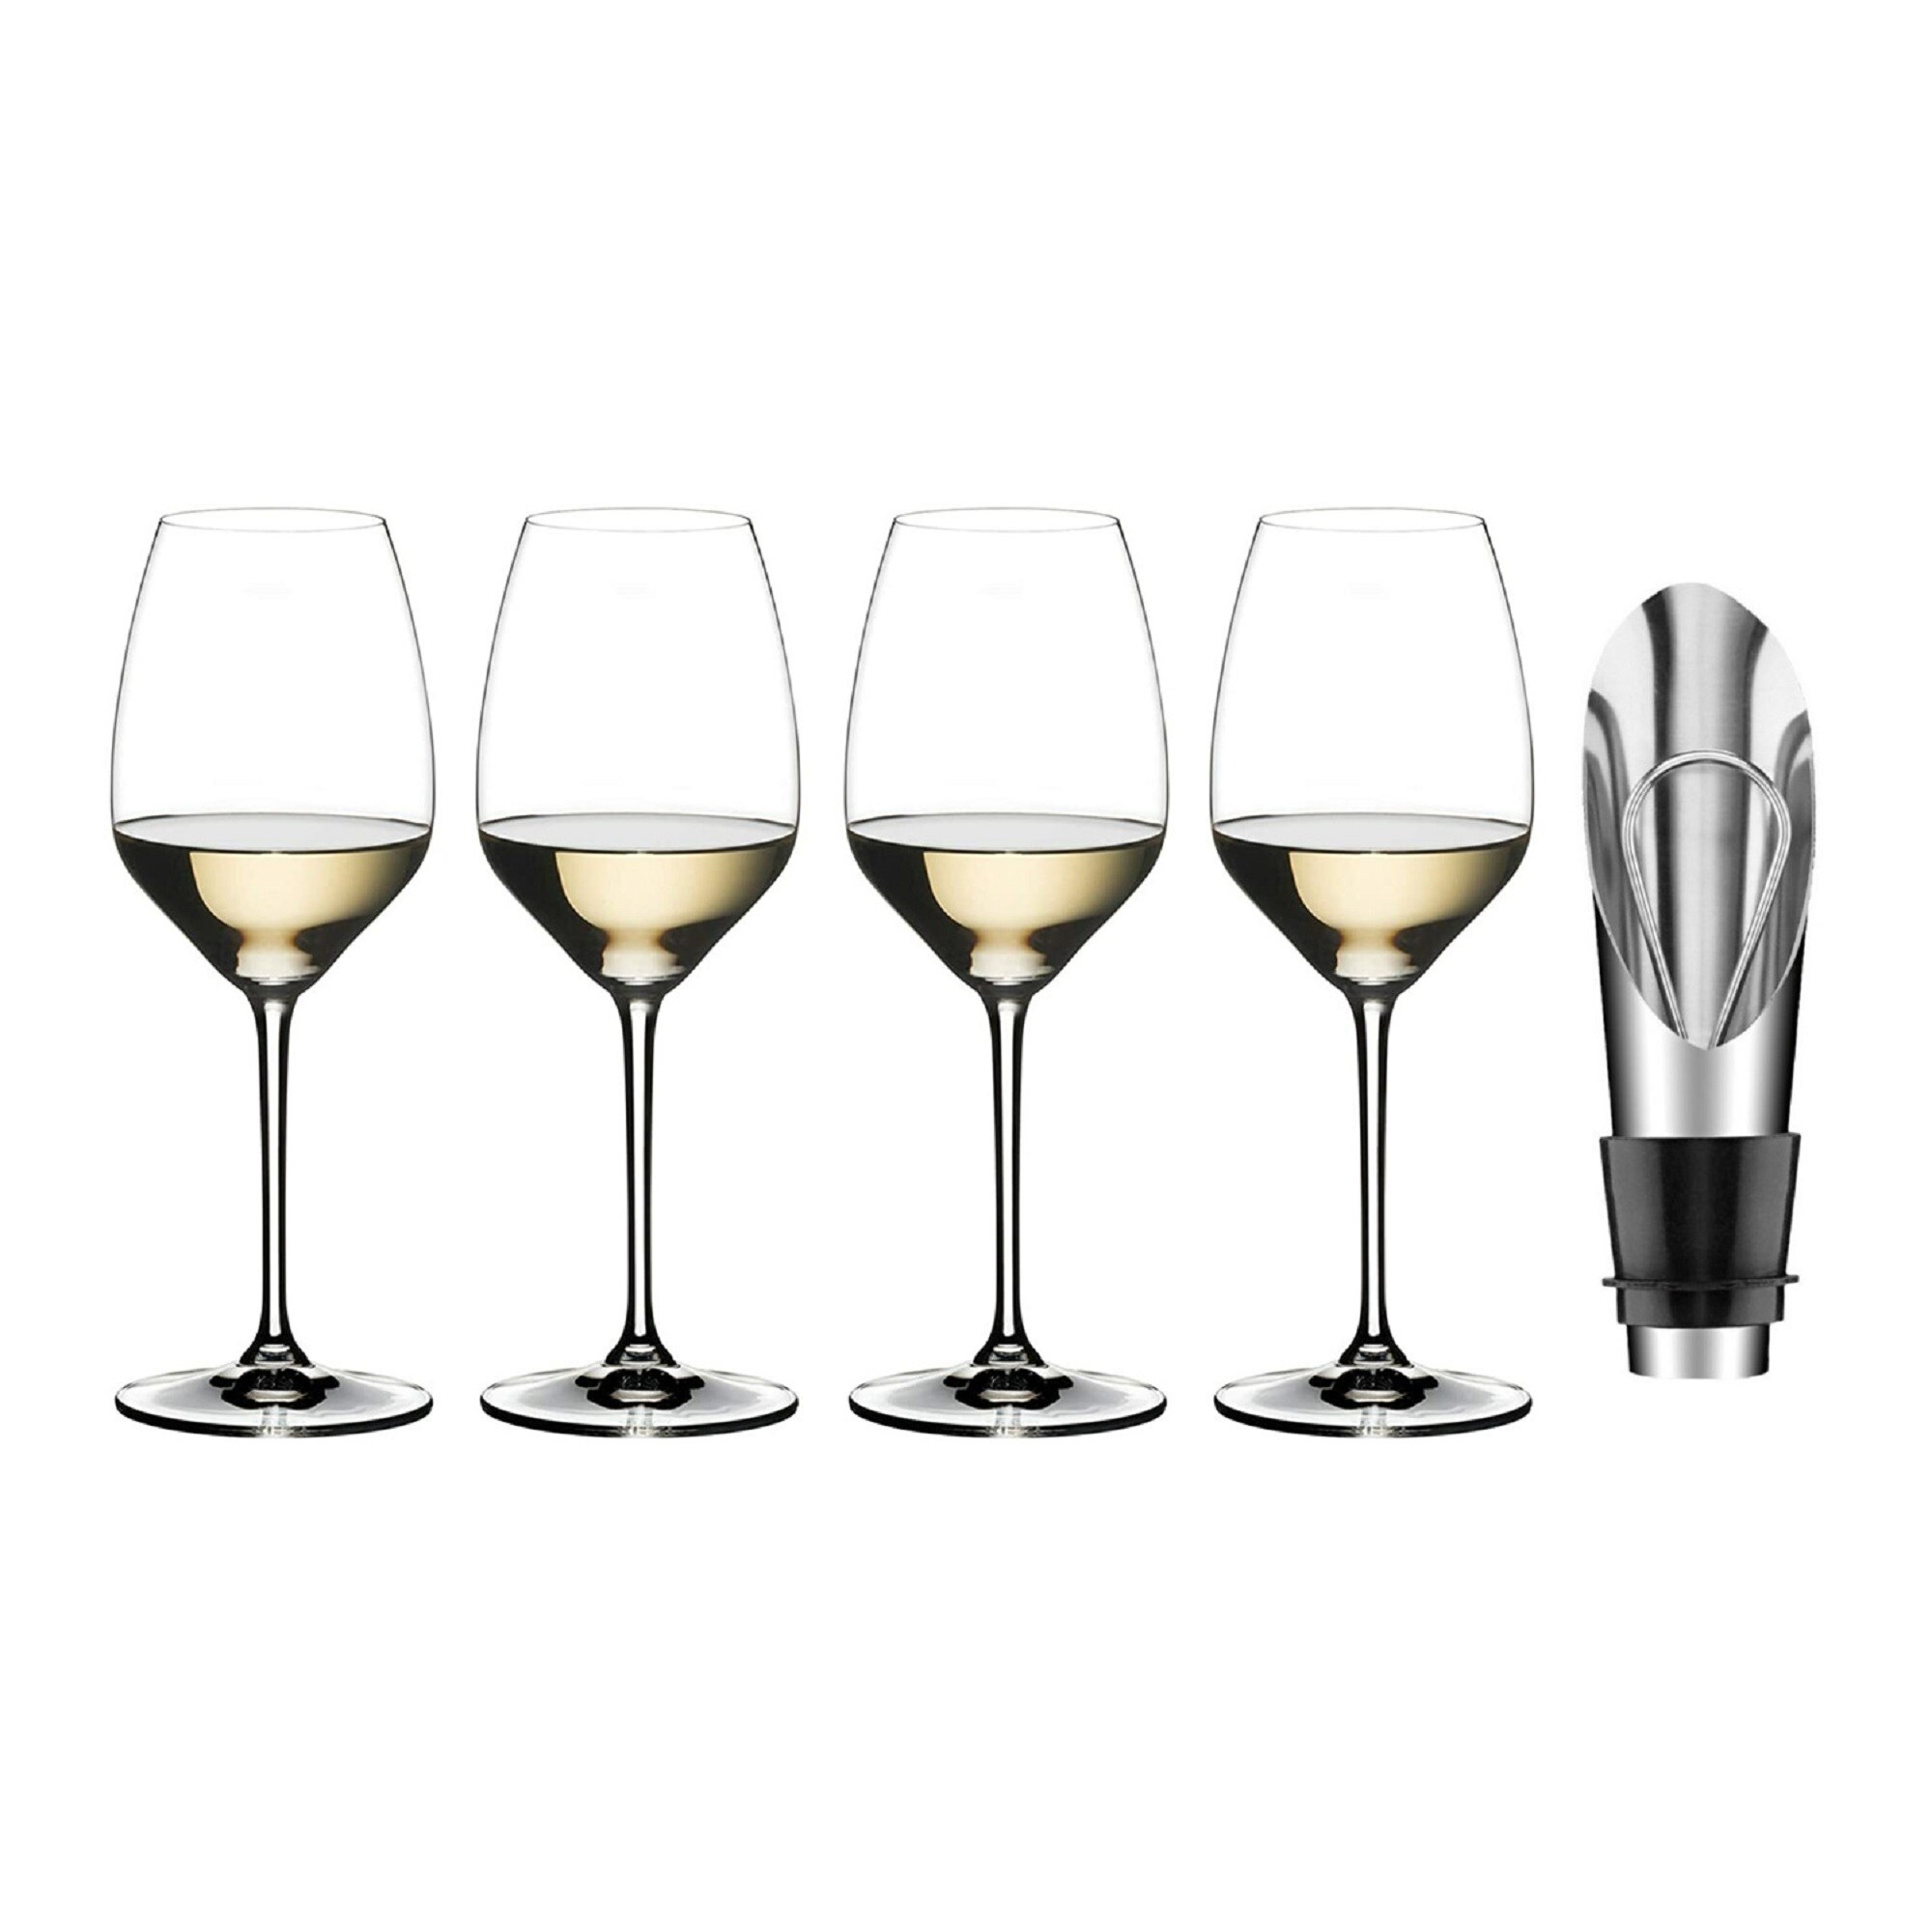 https://ak1.ostkcdn.com/images/products/is/images/direct/dbb62acc97d80bf5dd3e1a2163e48e93d7116281/Riedel-Extreme-Riesling-Wine-Glass-%28Set-of-4%2C-Clear%29-Bundle.jpg